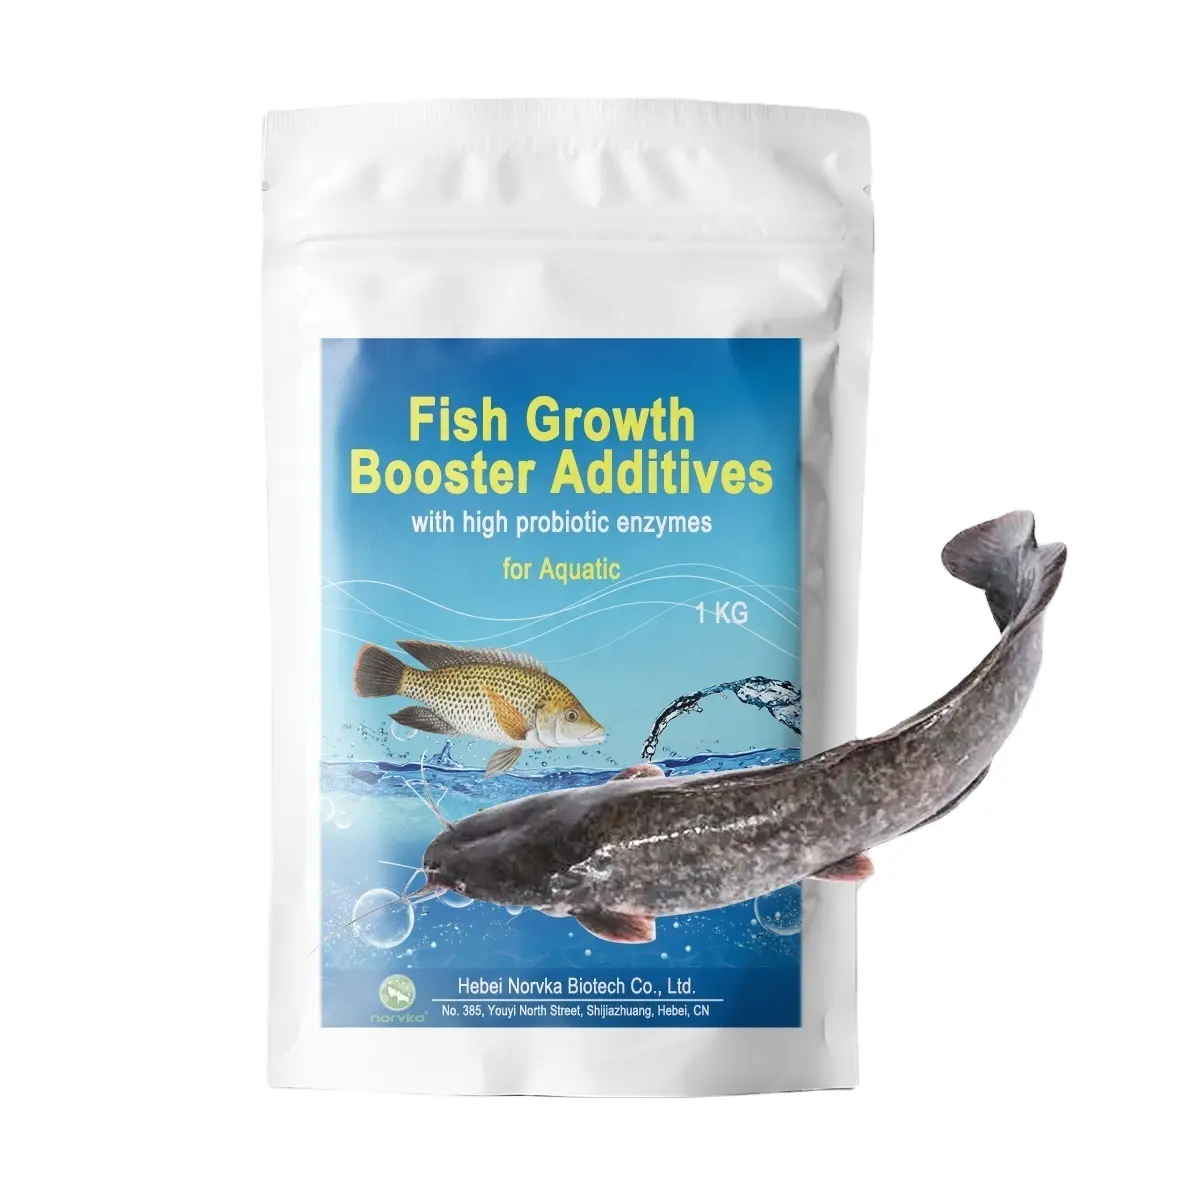 Fish growth booster feed additives supplement probiotics enzymes for tilapia catfish